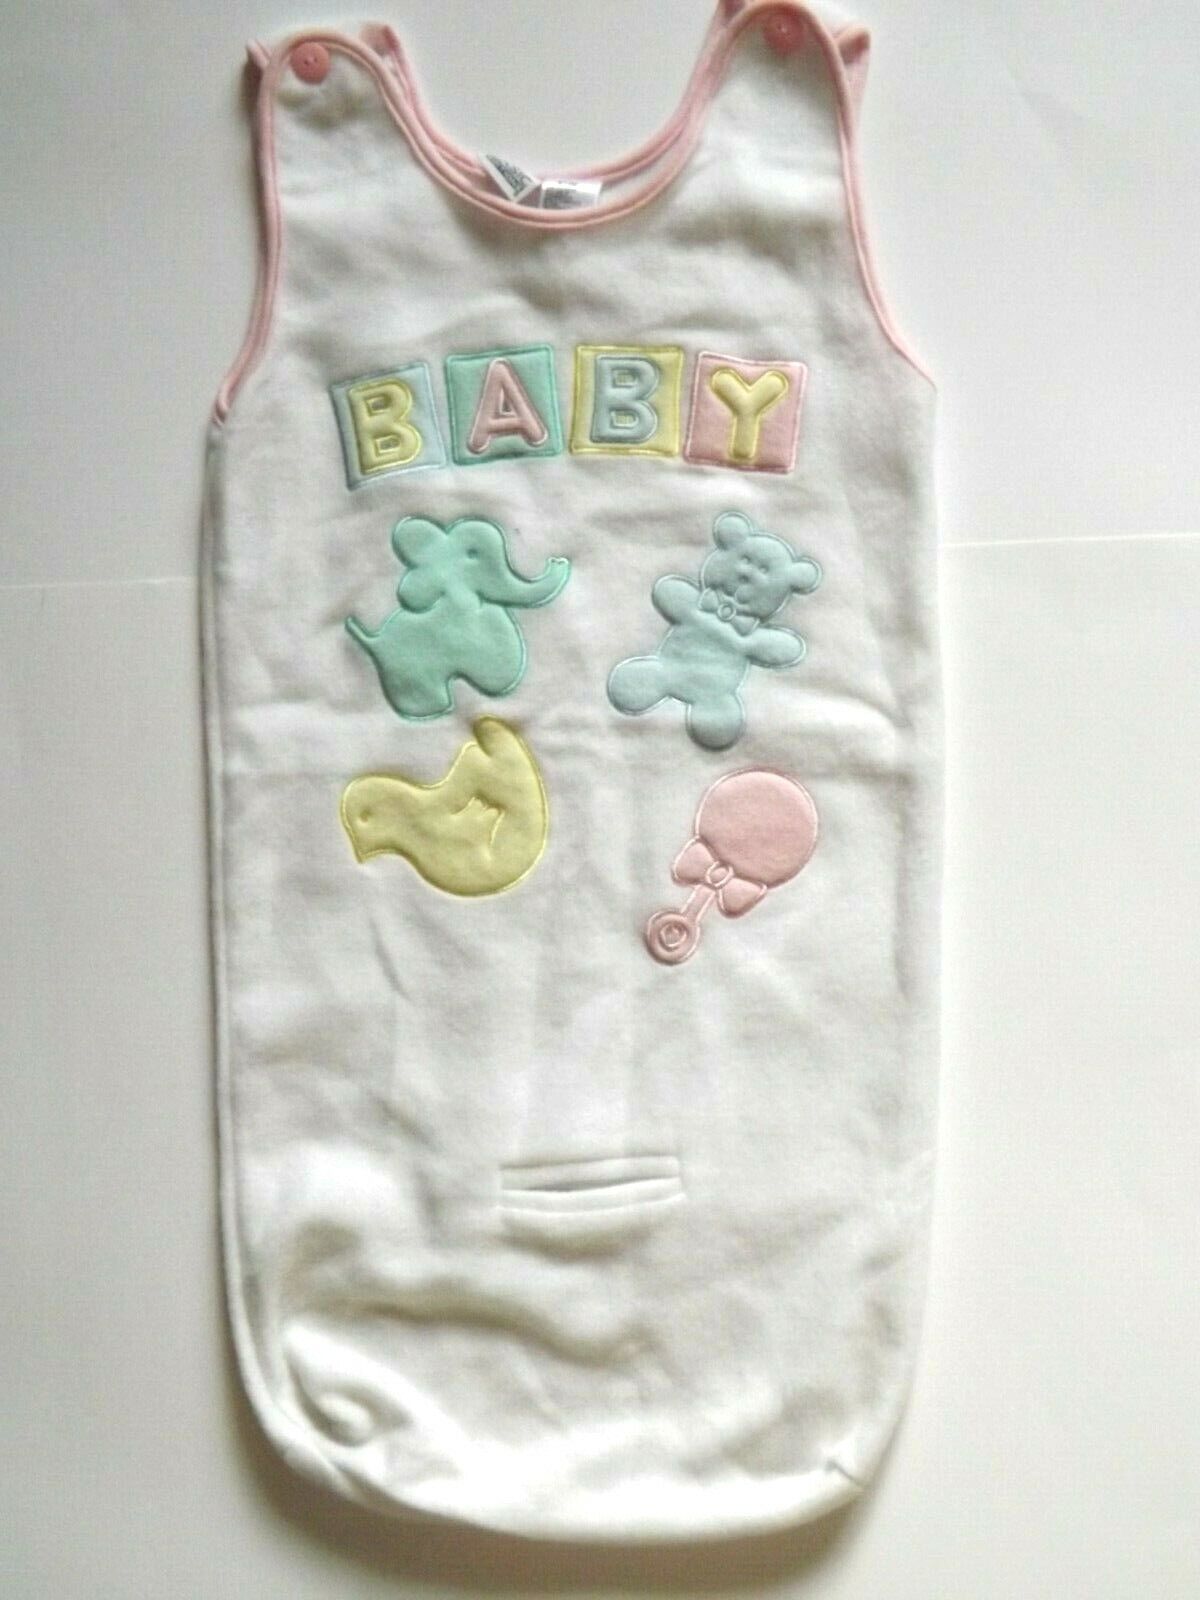 Basic Editions Baby Sleeping Bag Size: 6/12 Months ()